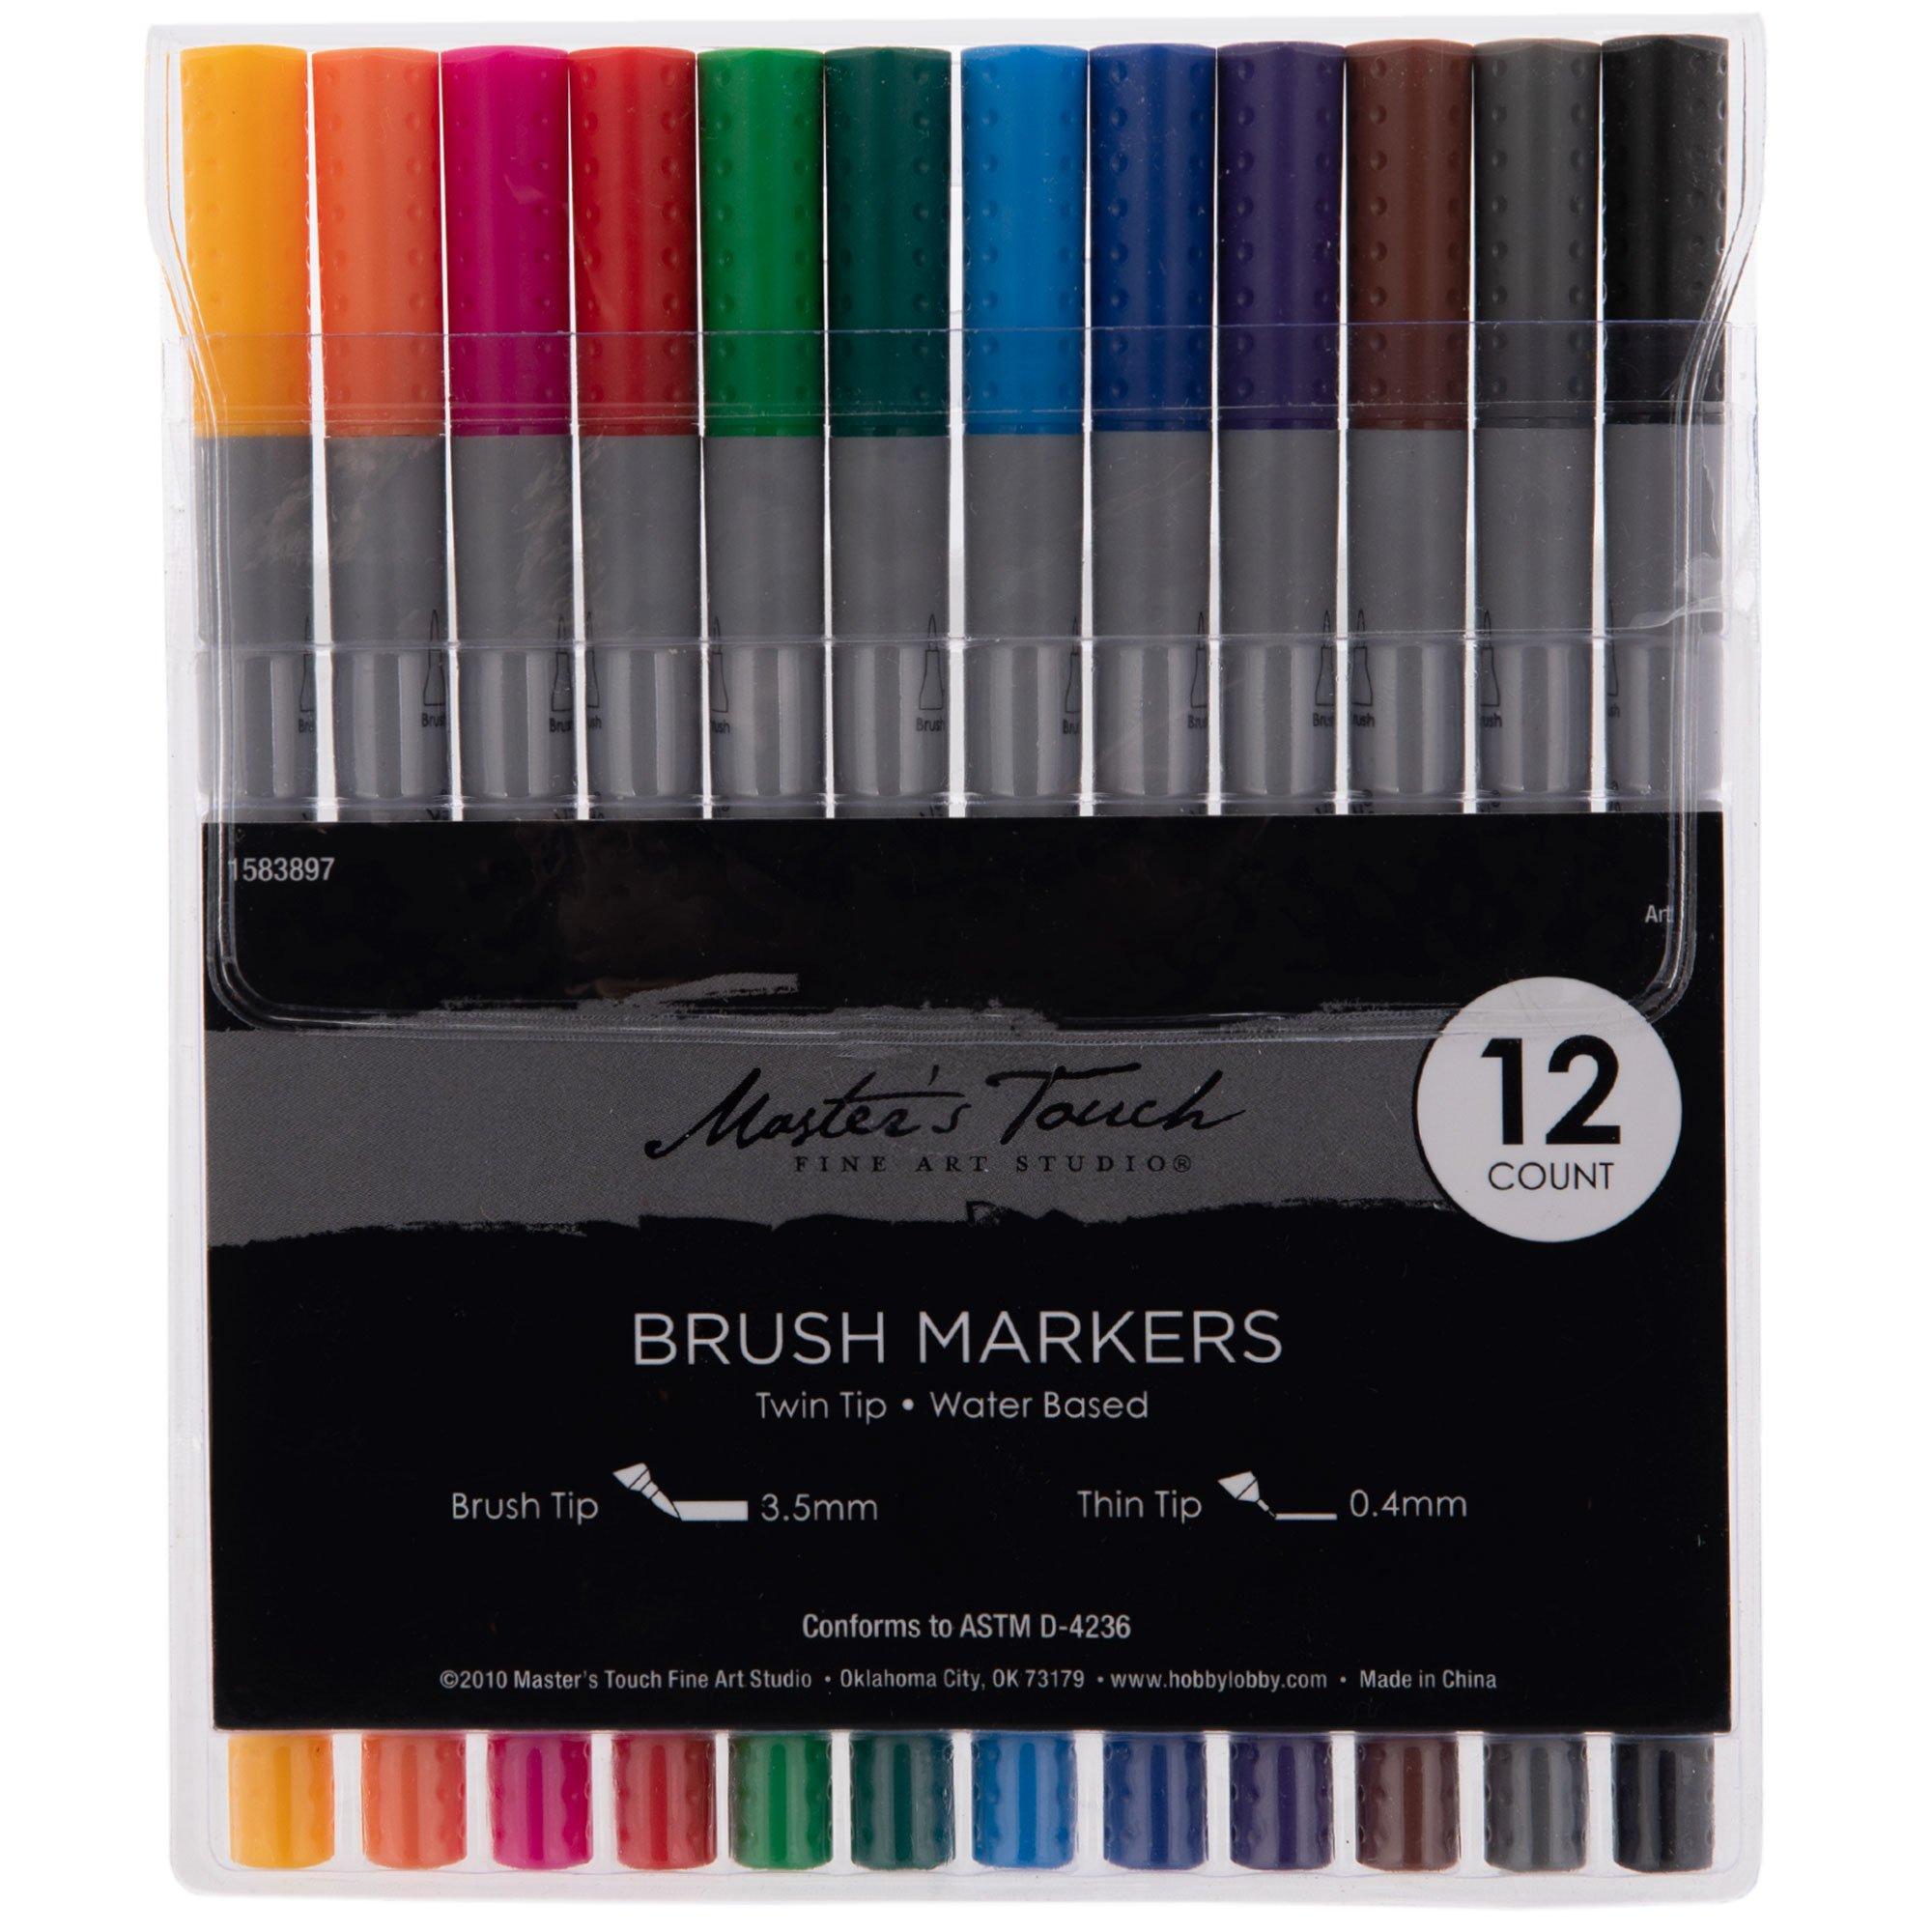 Master's Touch Twin Tip Brush Markers, Hobby Lobby